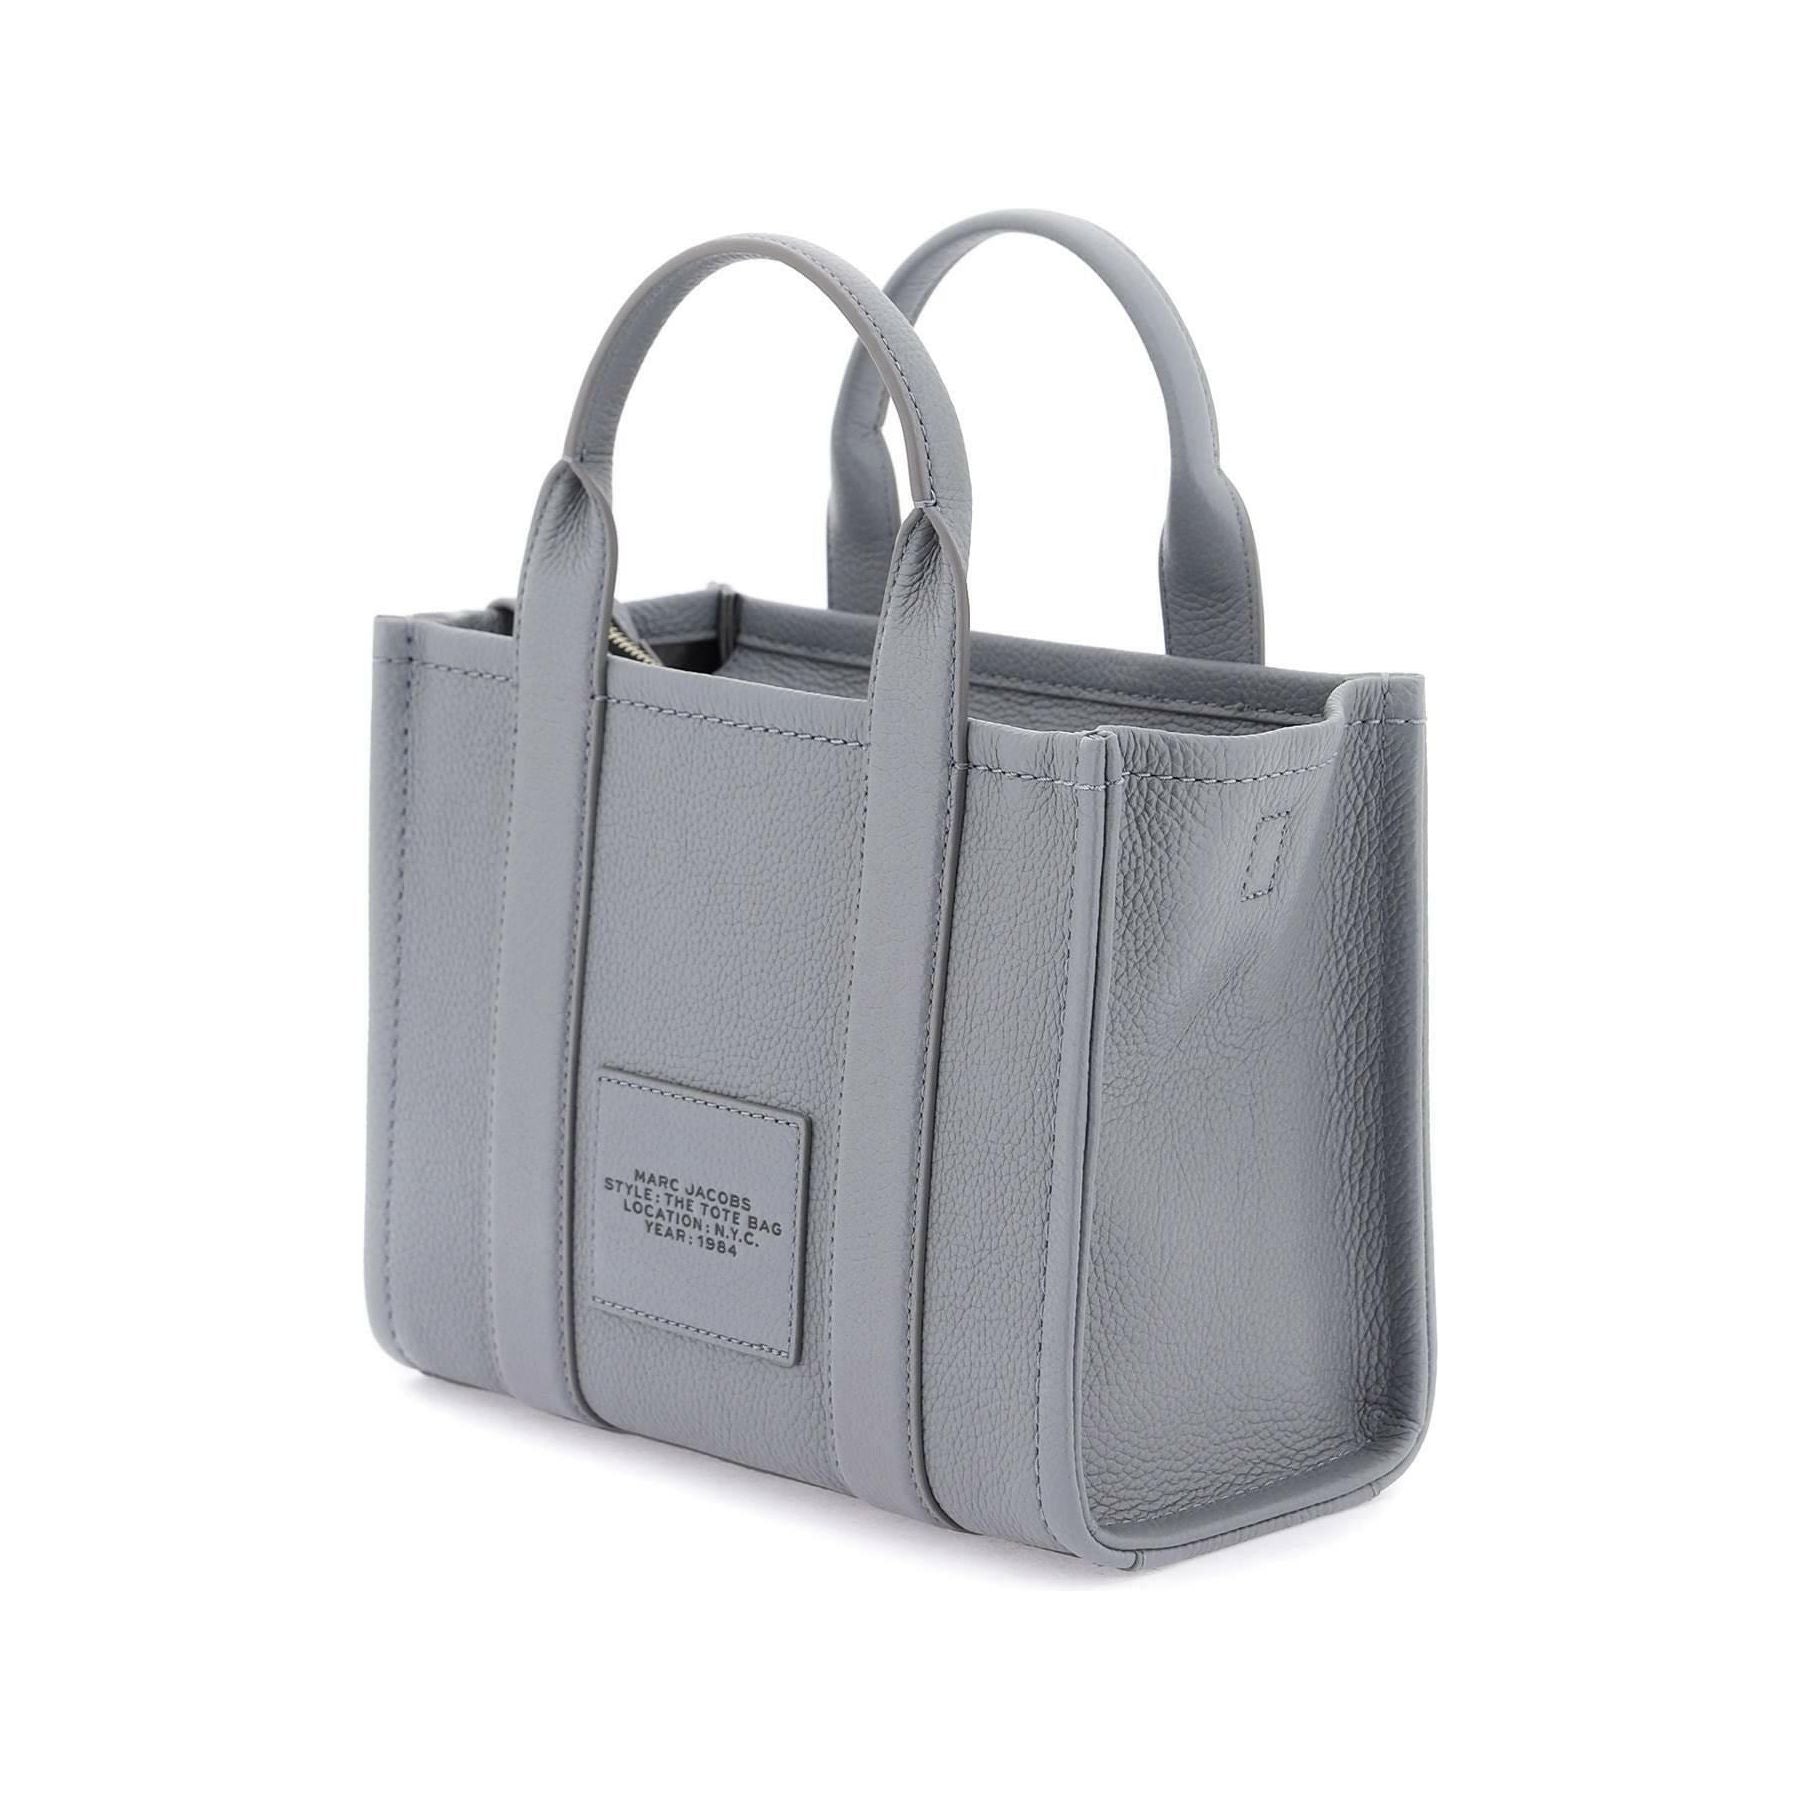 Wolf Grey The Leather Small Tote Bag MARC JACOBS JOHN JULIA.